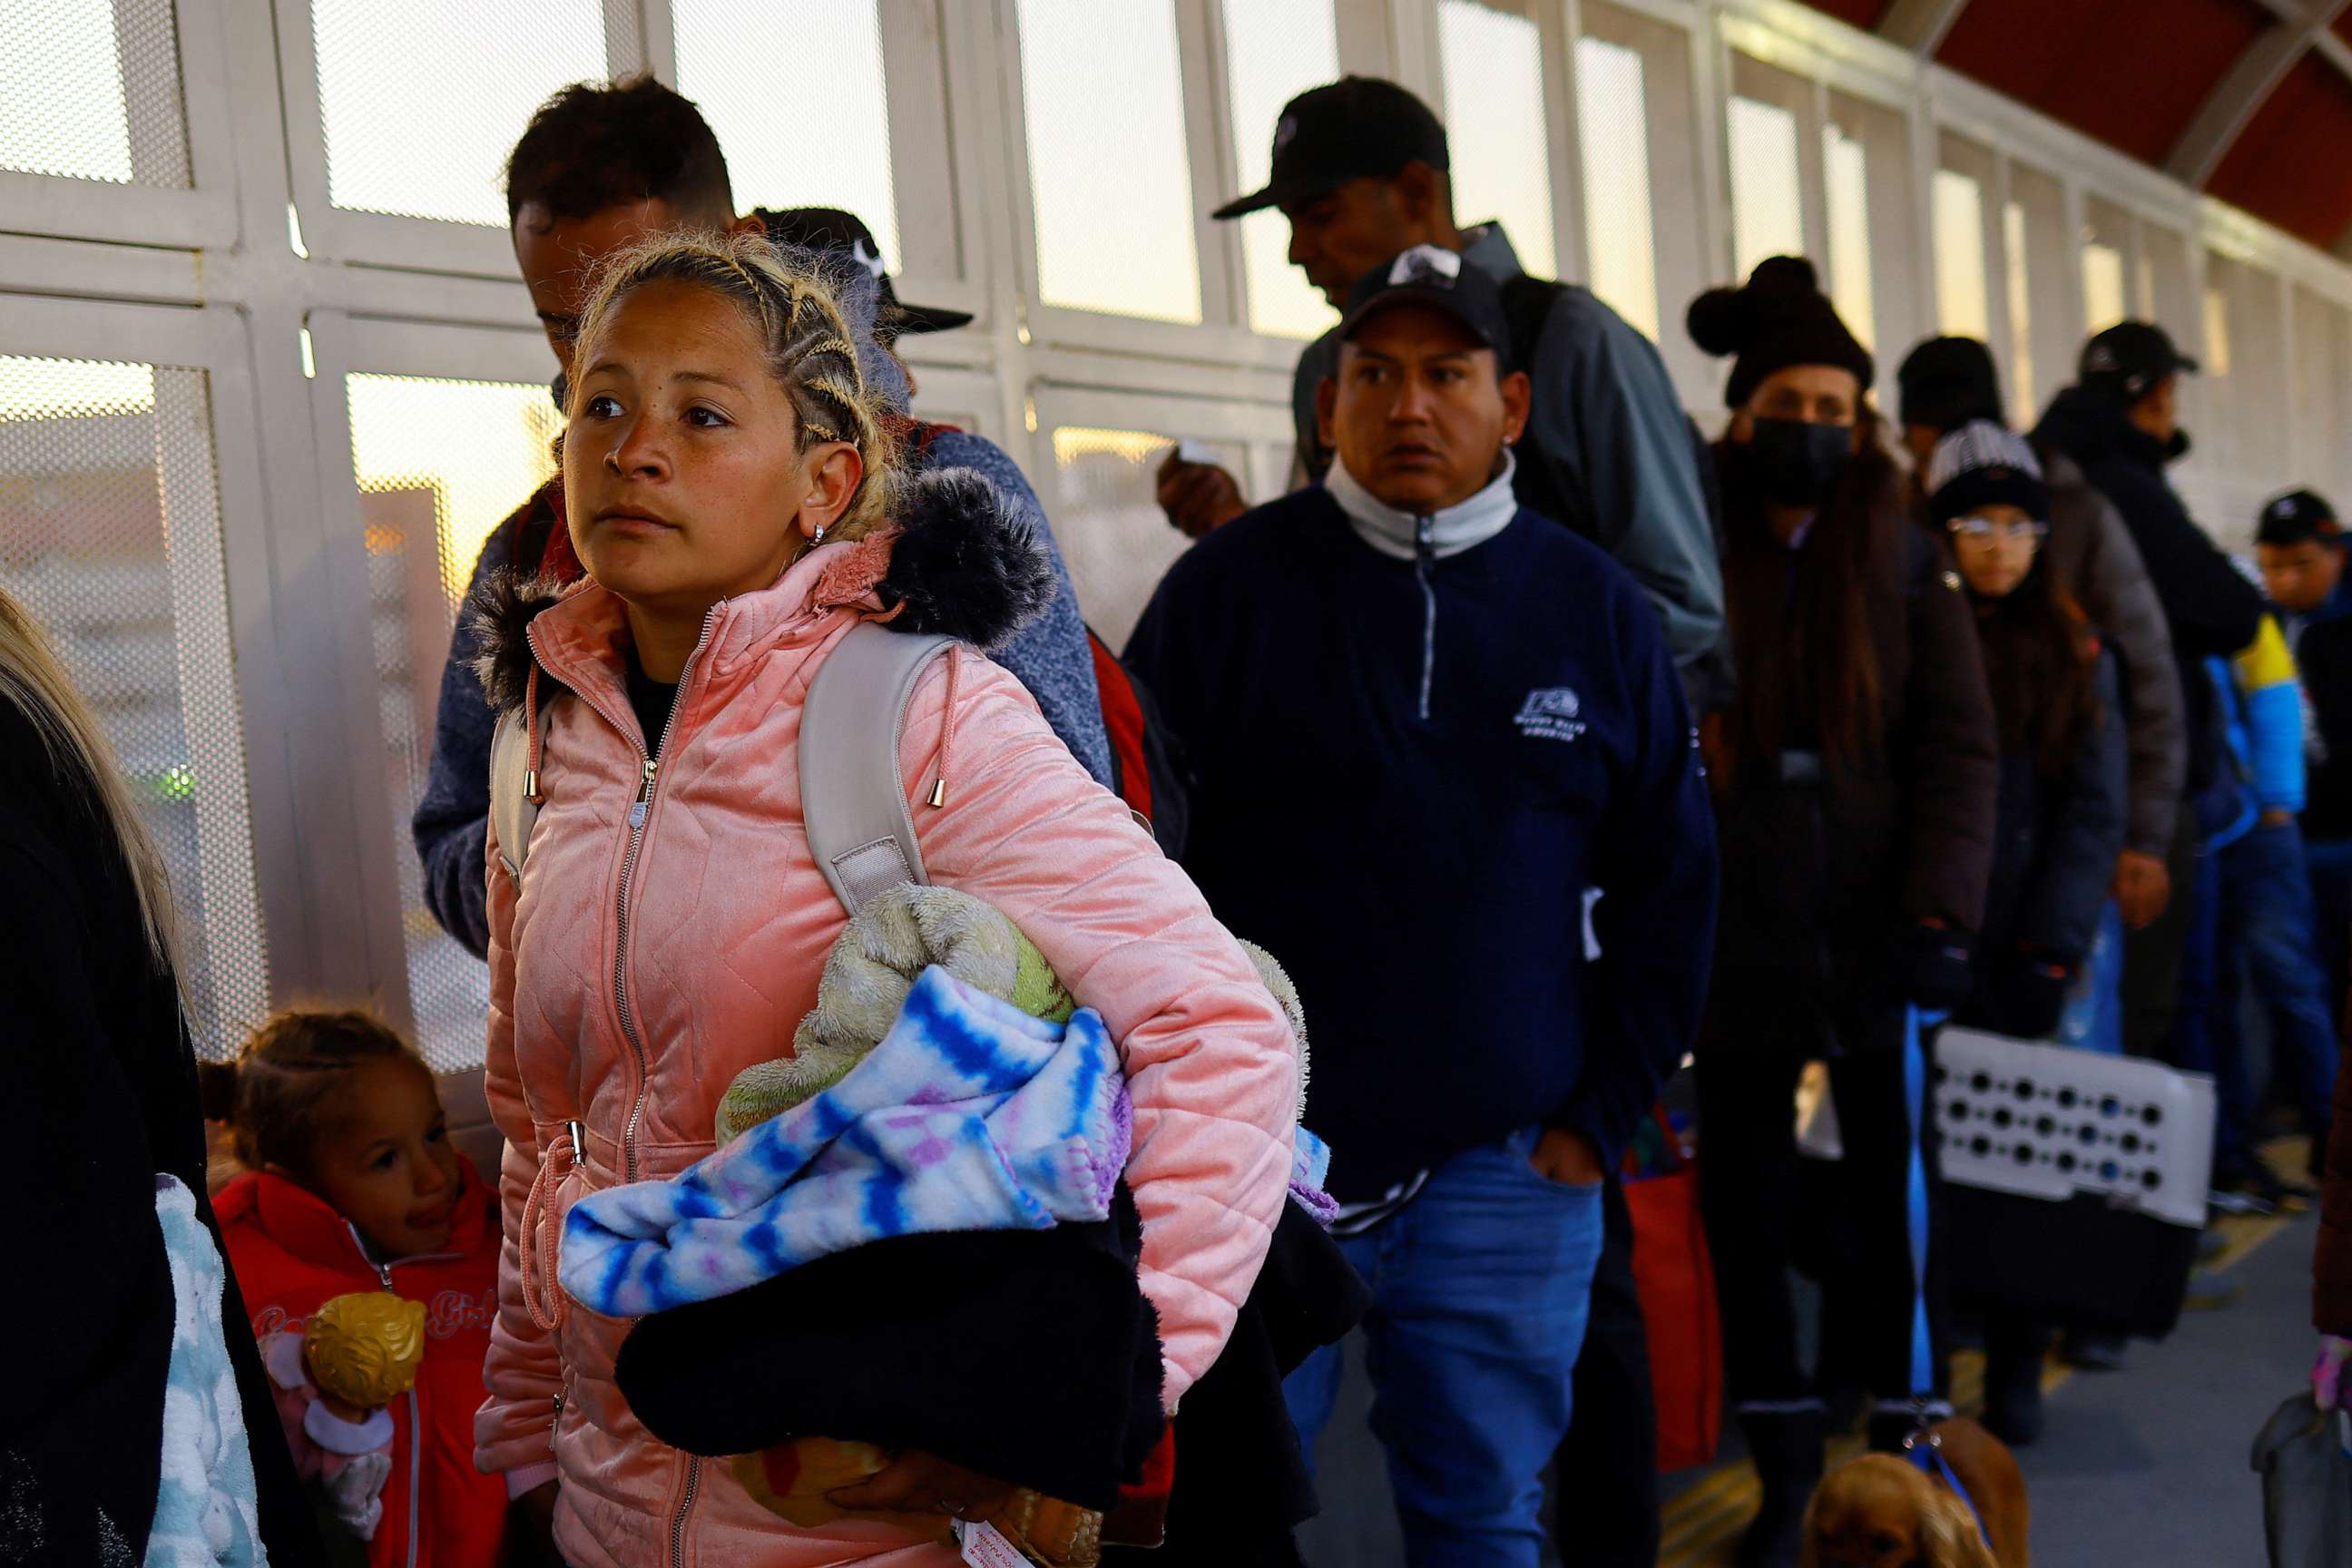 PHOTO: The Hernandez family, Venezuelan migrants seeking asylum in the United States wait to attend their appointment at the Paso del Norte International bridge, in Ciudad Juarez, Mexico Feb. 3, 2023.